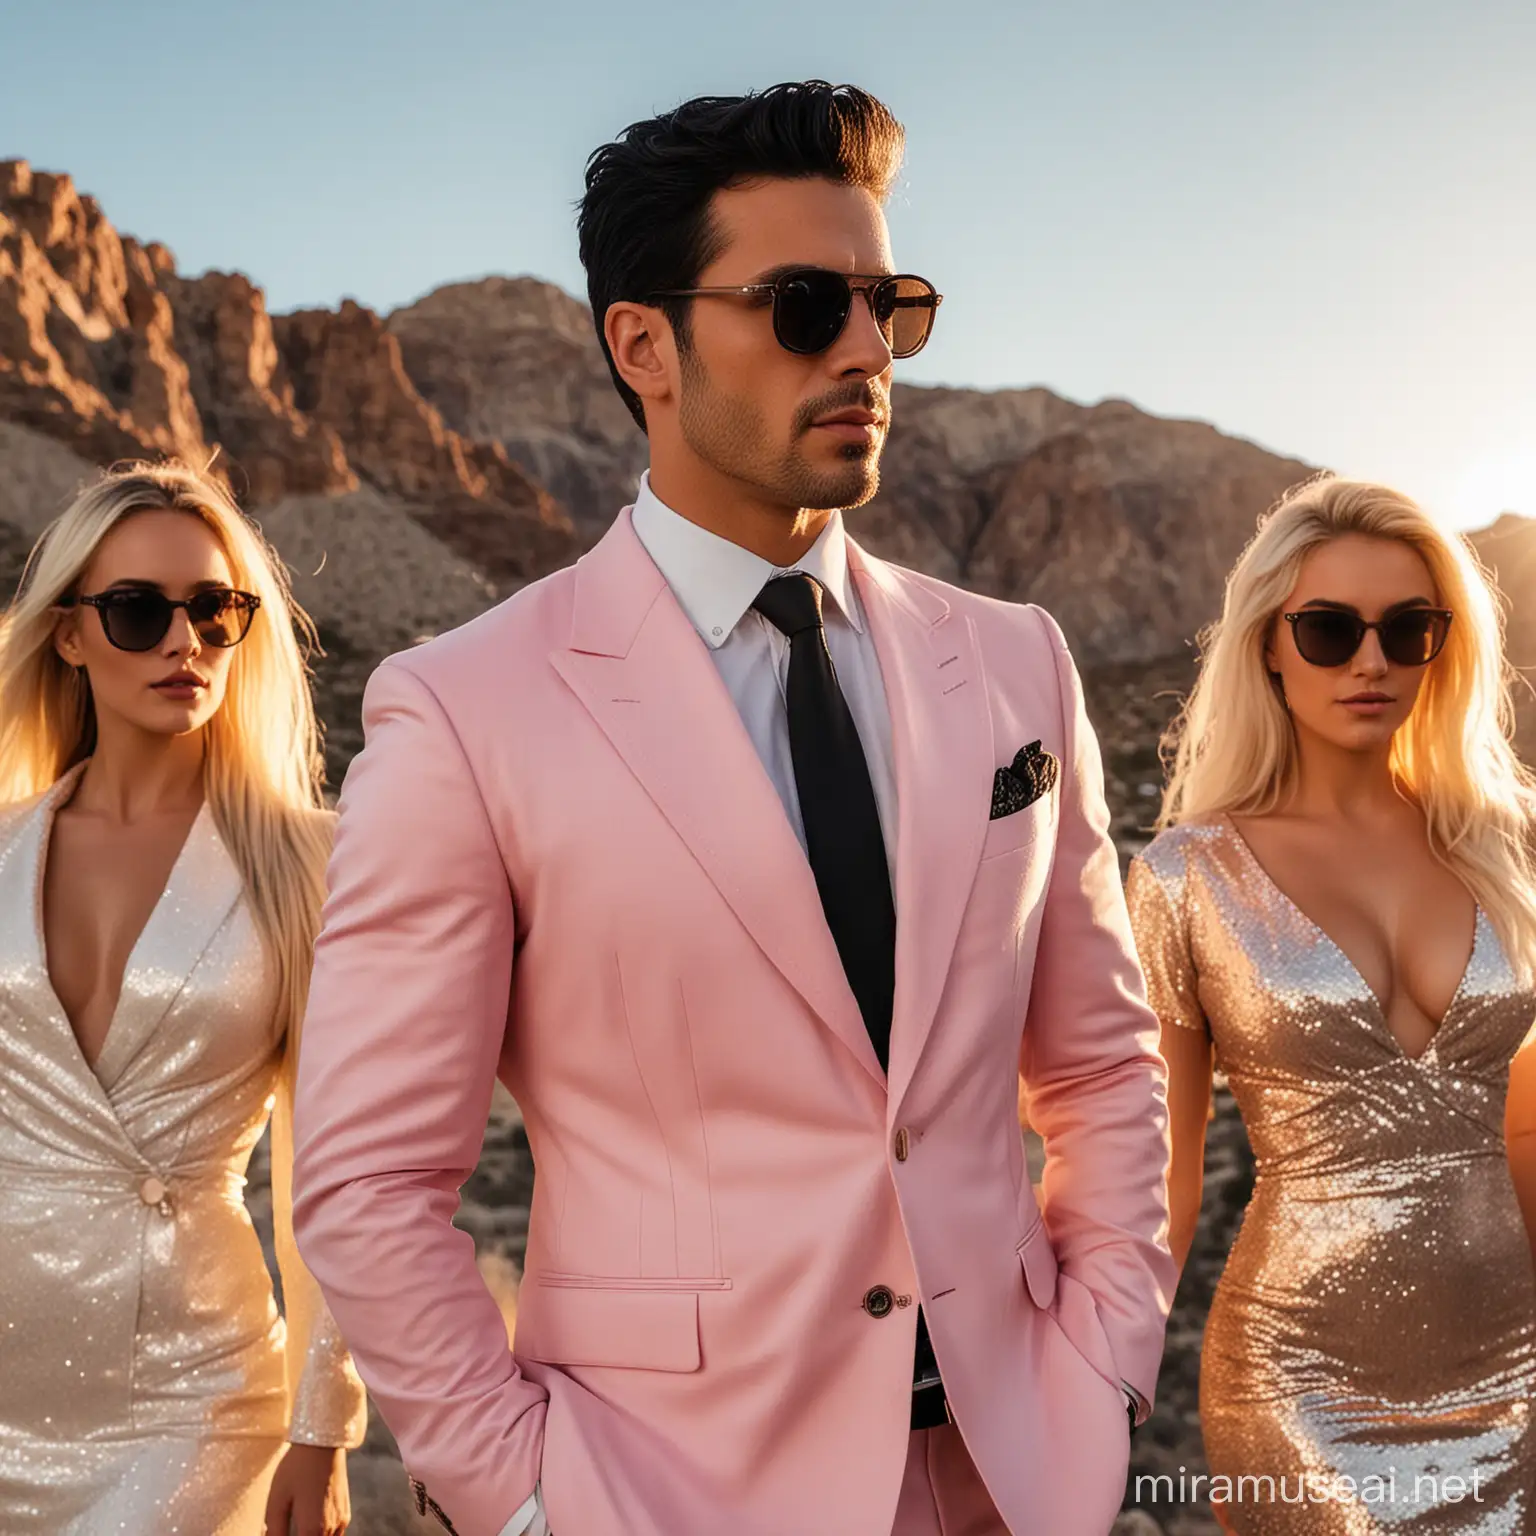 A handsome and elegant man wearing a fancy suit, with black hair and a light beard, wearing sunglasses, with a group of sexy blonde women in a mountainous place like Las Vegas at sunset. I want to focus on the man.